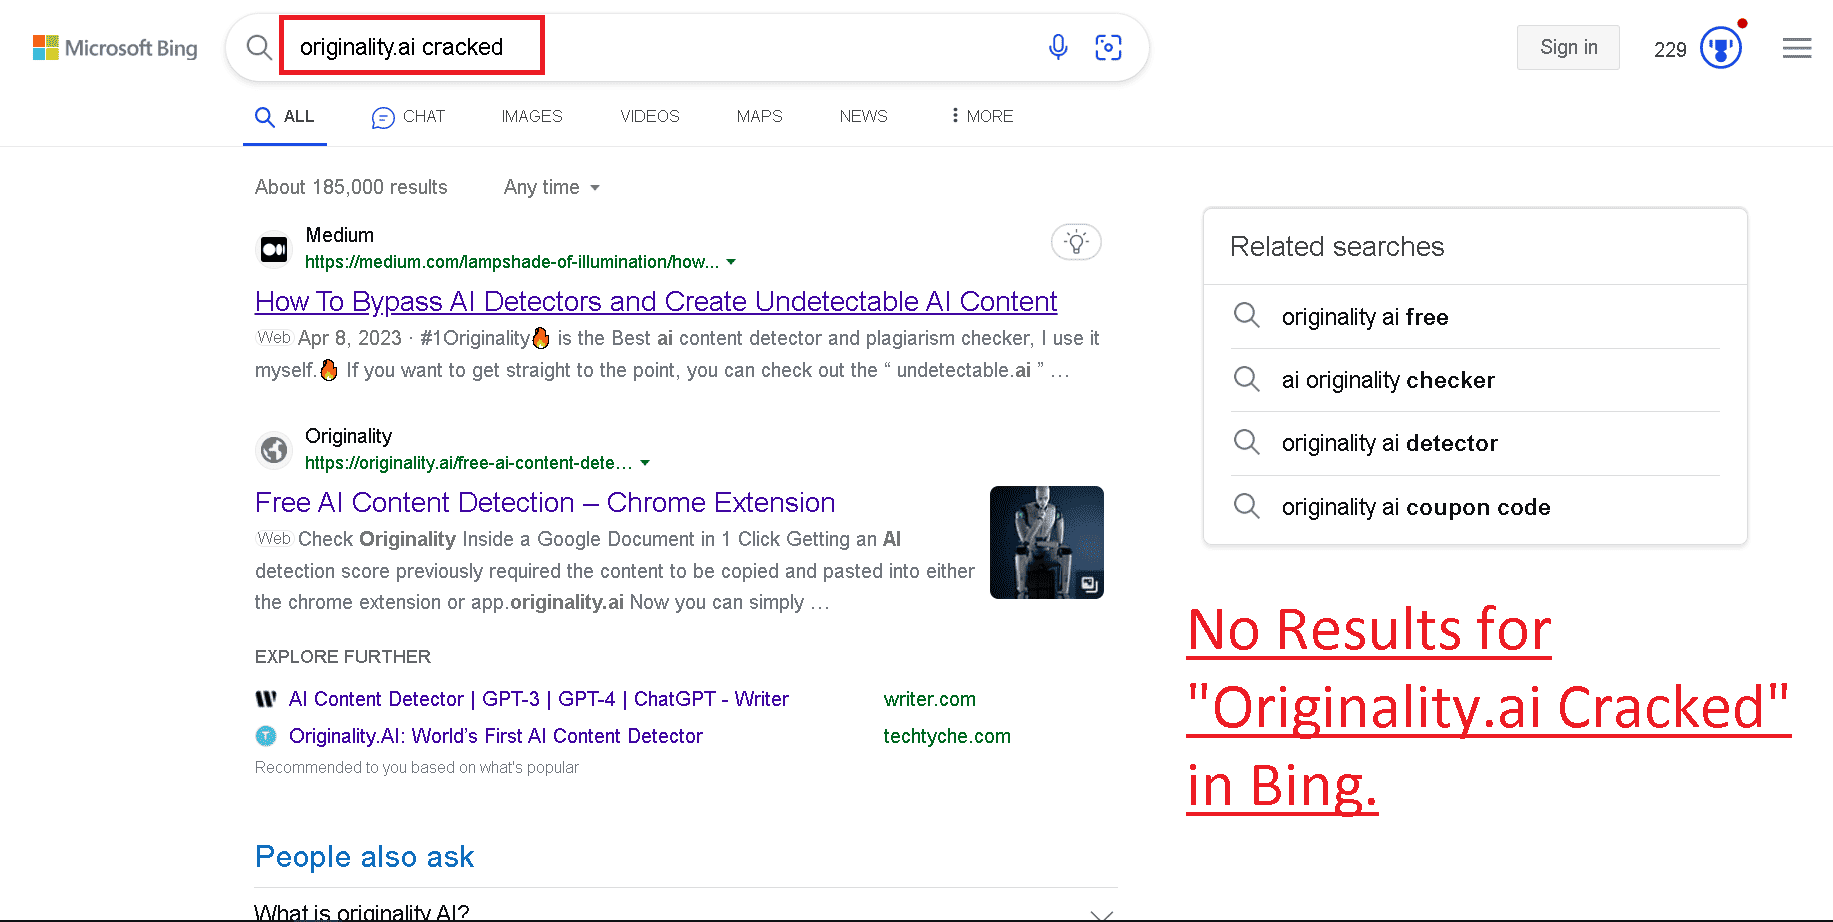 Originality.ai cracked query searched in Bing